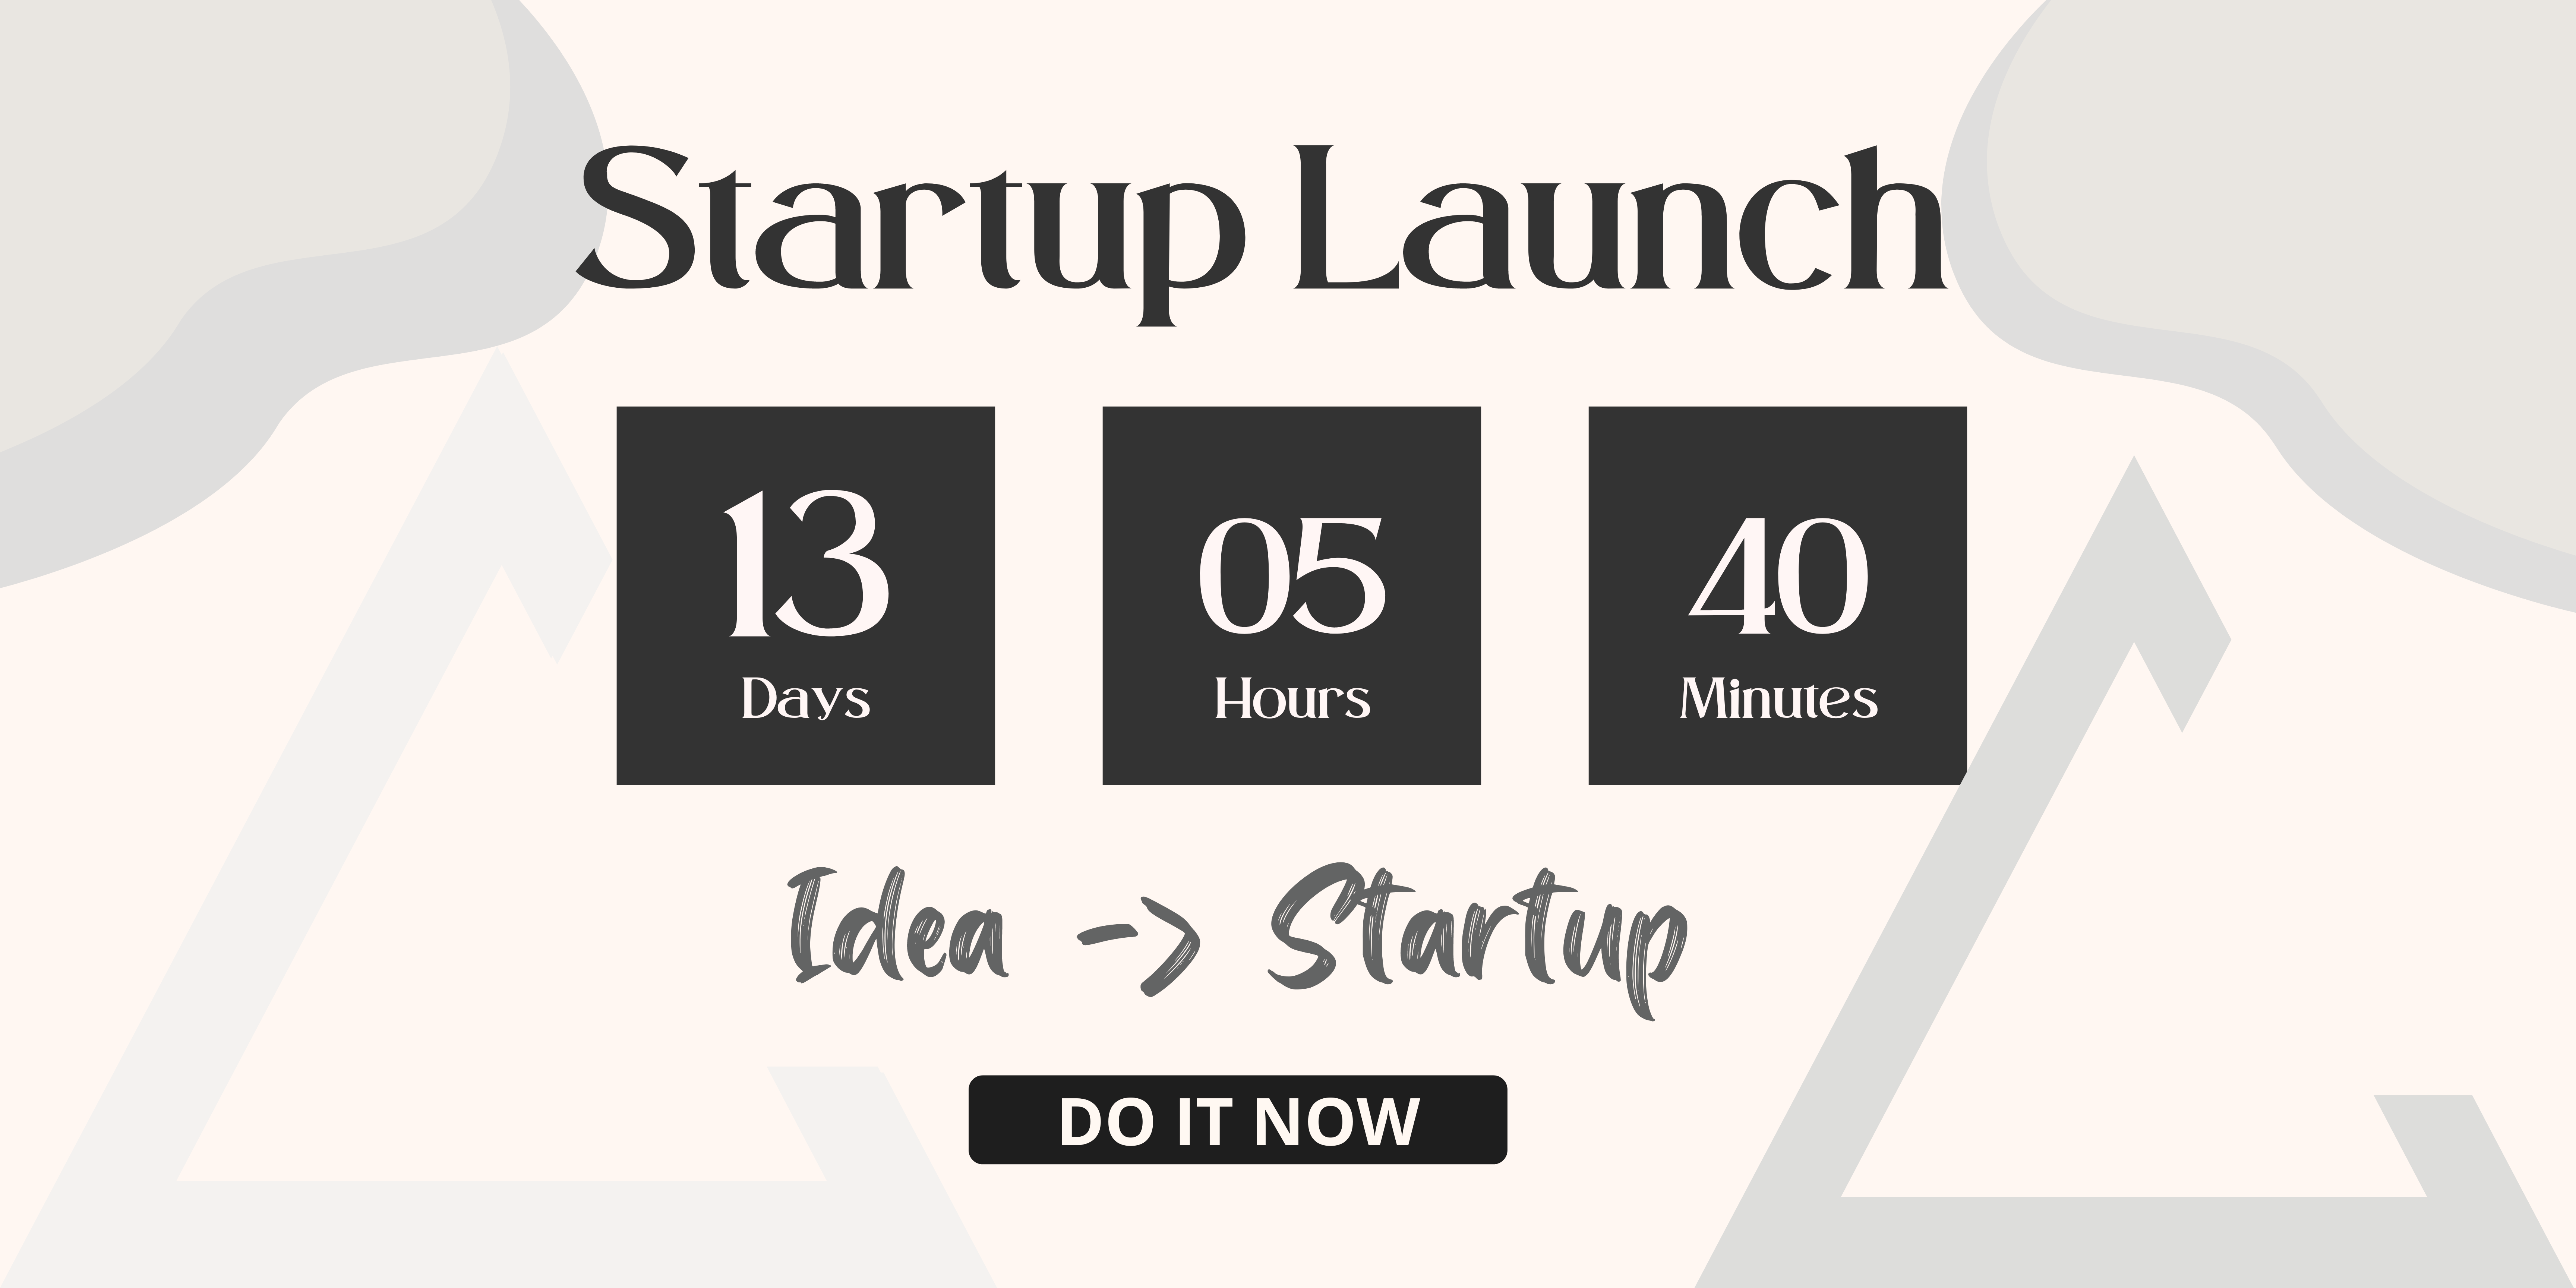 Launch your startup